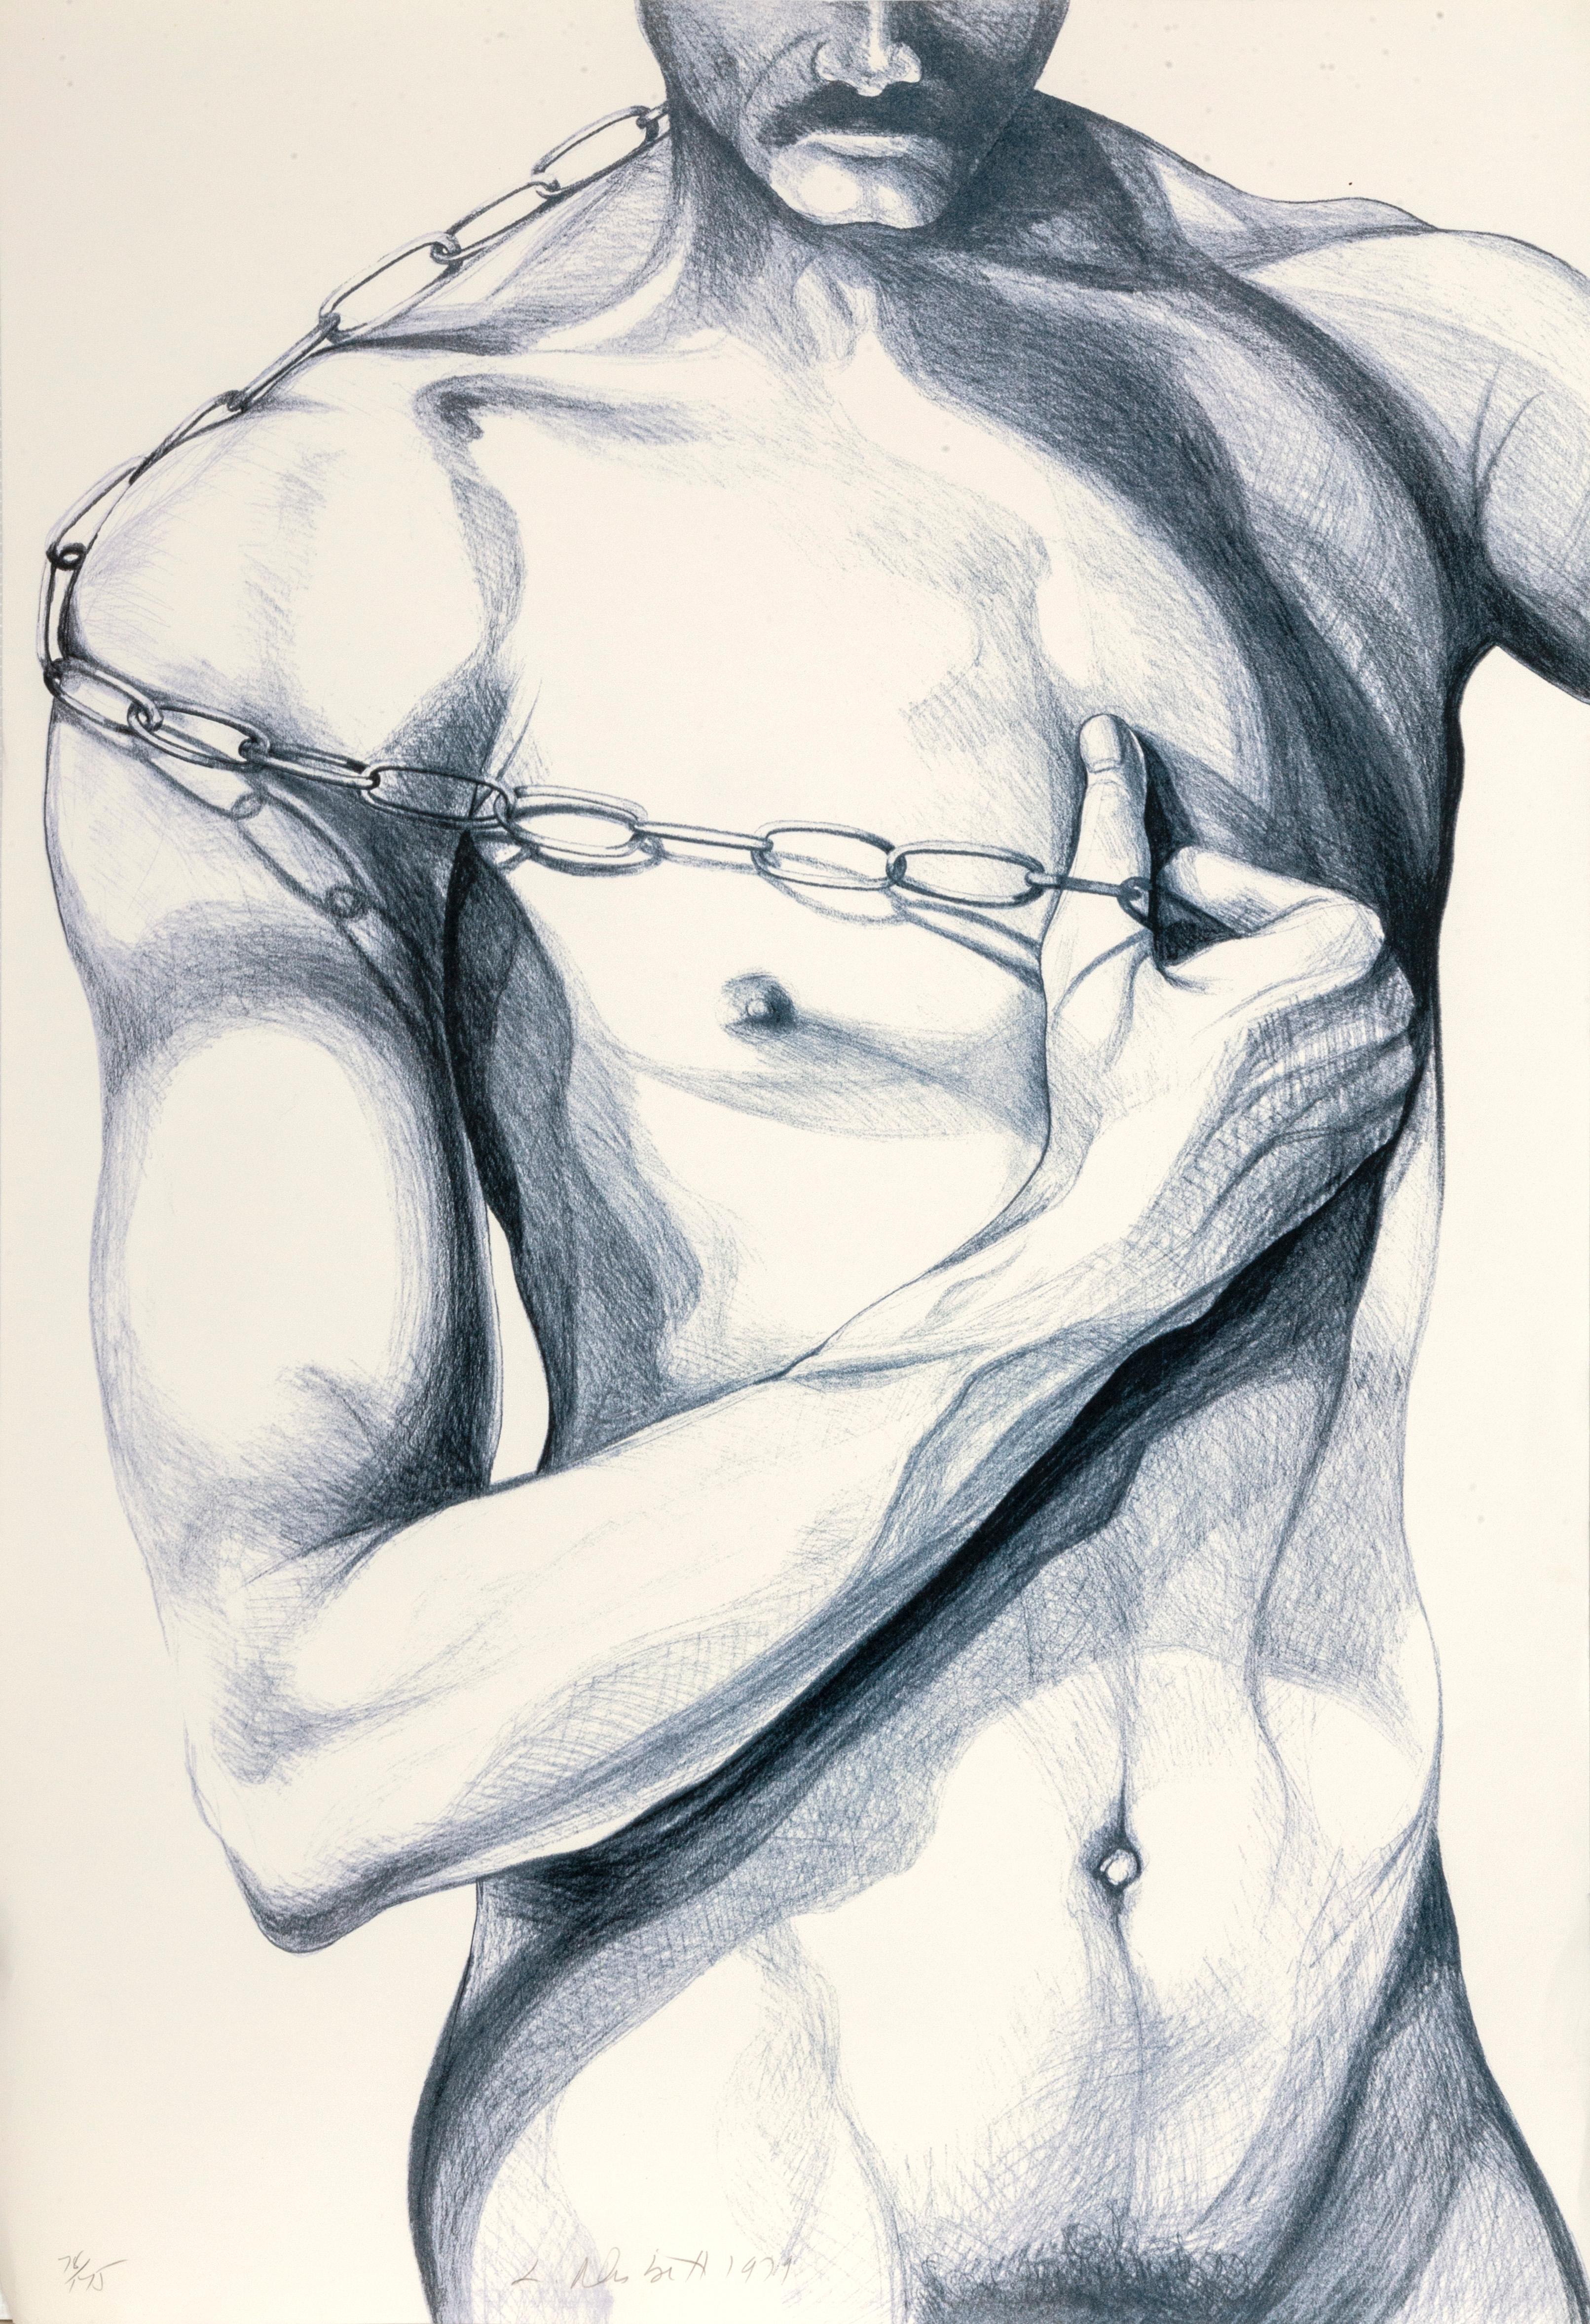 Artist: Lowell Blair Nesbitt, American (1933 - 1993)
Titles: Male Nude 3
Year: 1979
Medium: Lithograph, signed and numbered in pencil 
Edition: 175
Paper Size: 44  x 30 in. (111.76  x 76.2 cm)